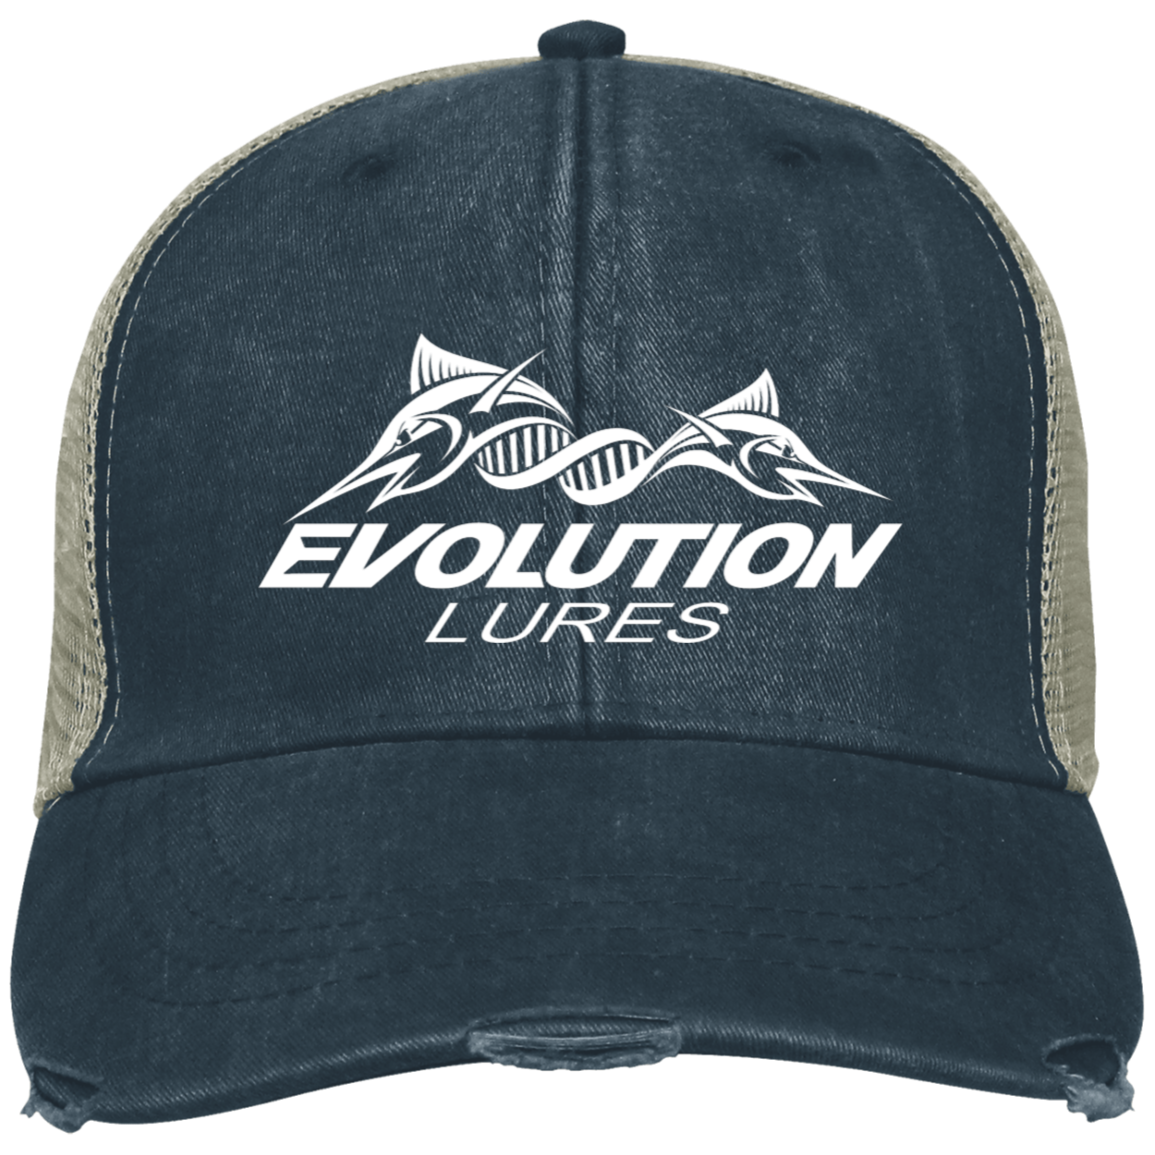 Washed out Trucker Hat - Evolution Lures